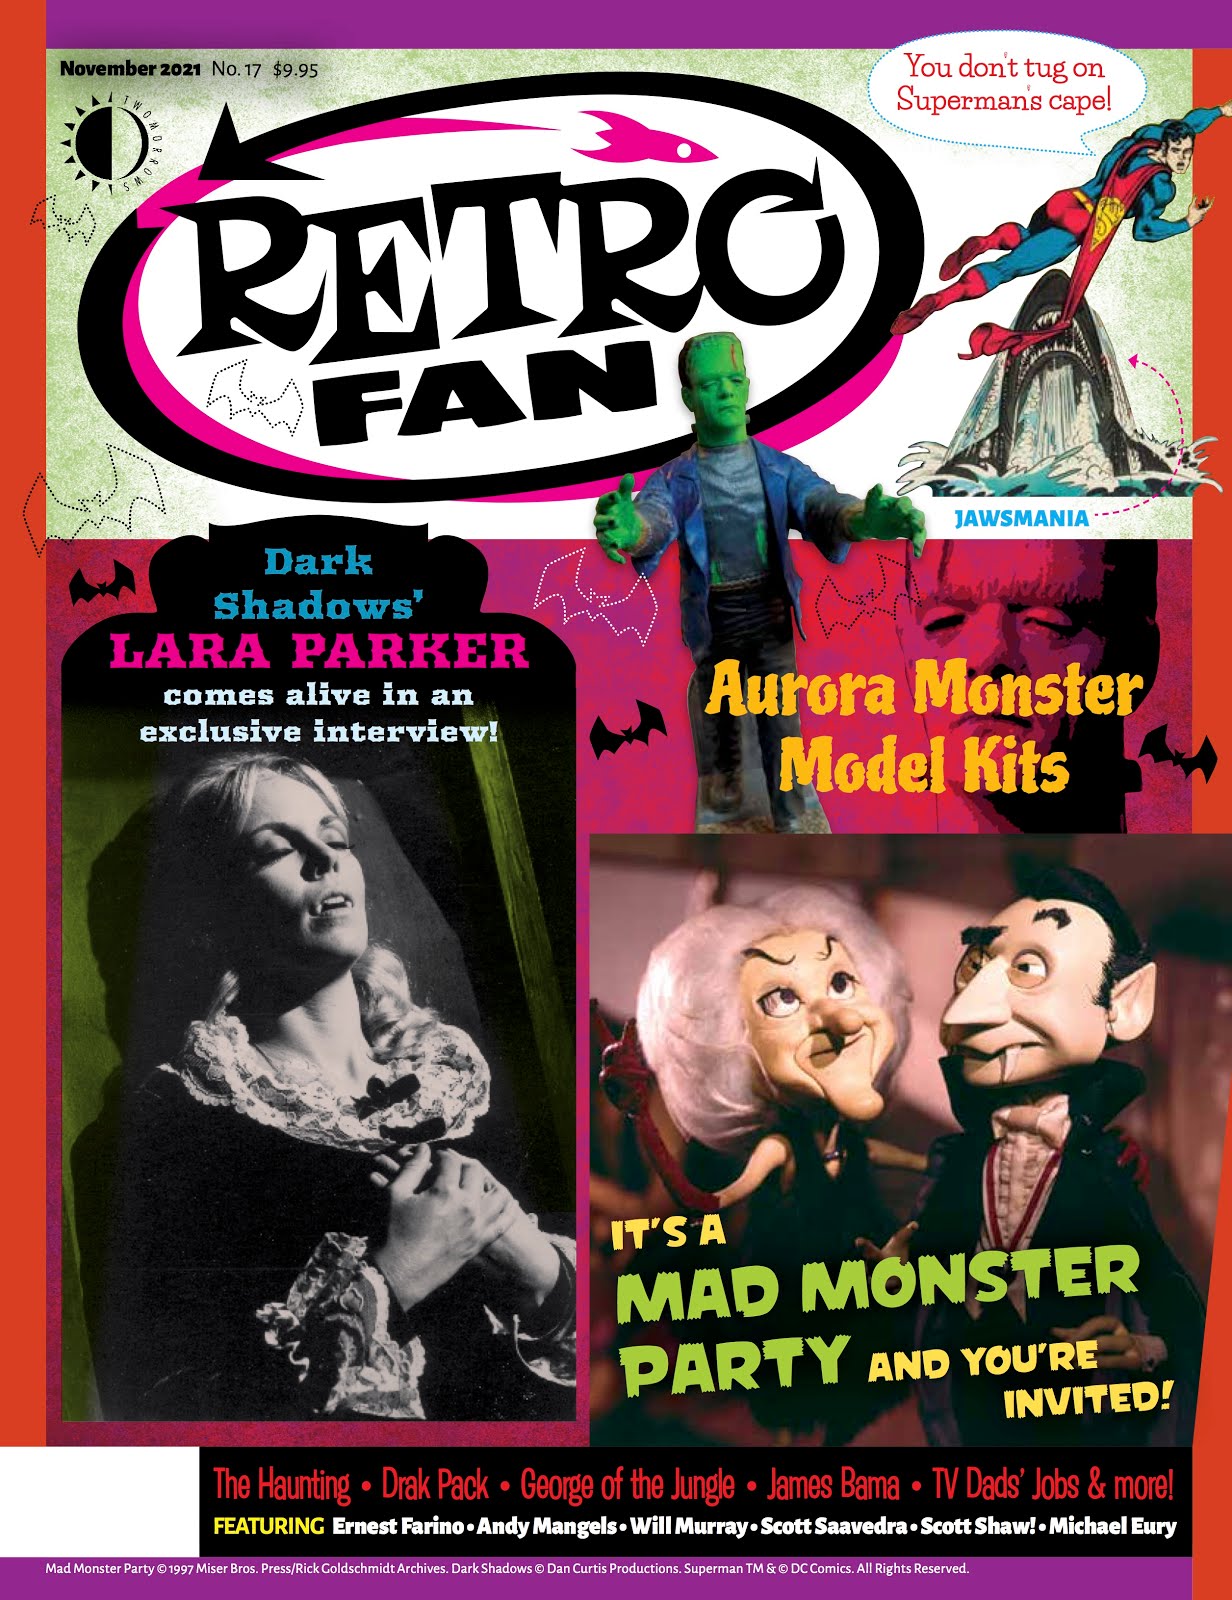 RetroFan Magazine #17 with my Mad Monster Party? Article